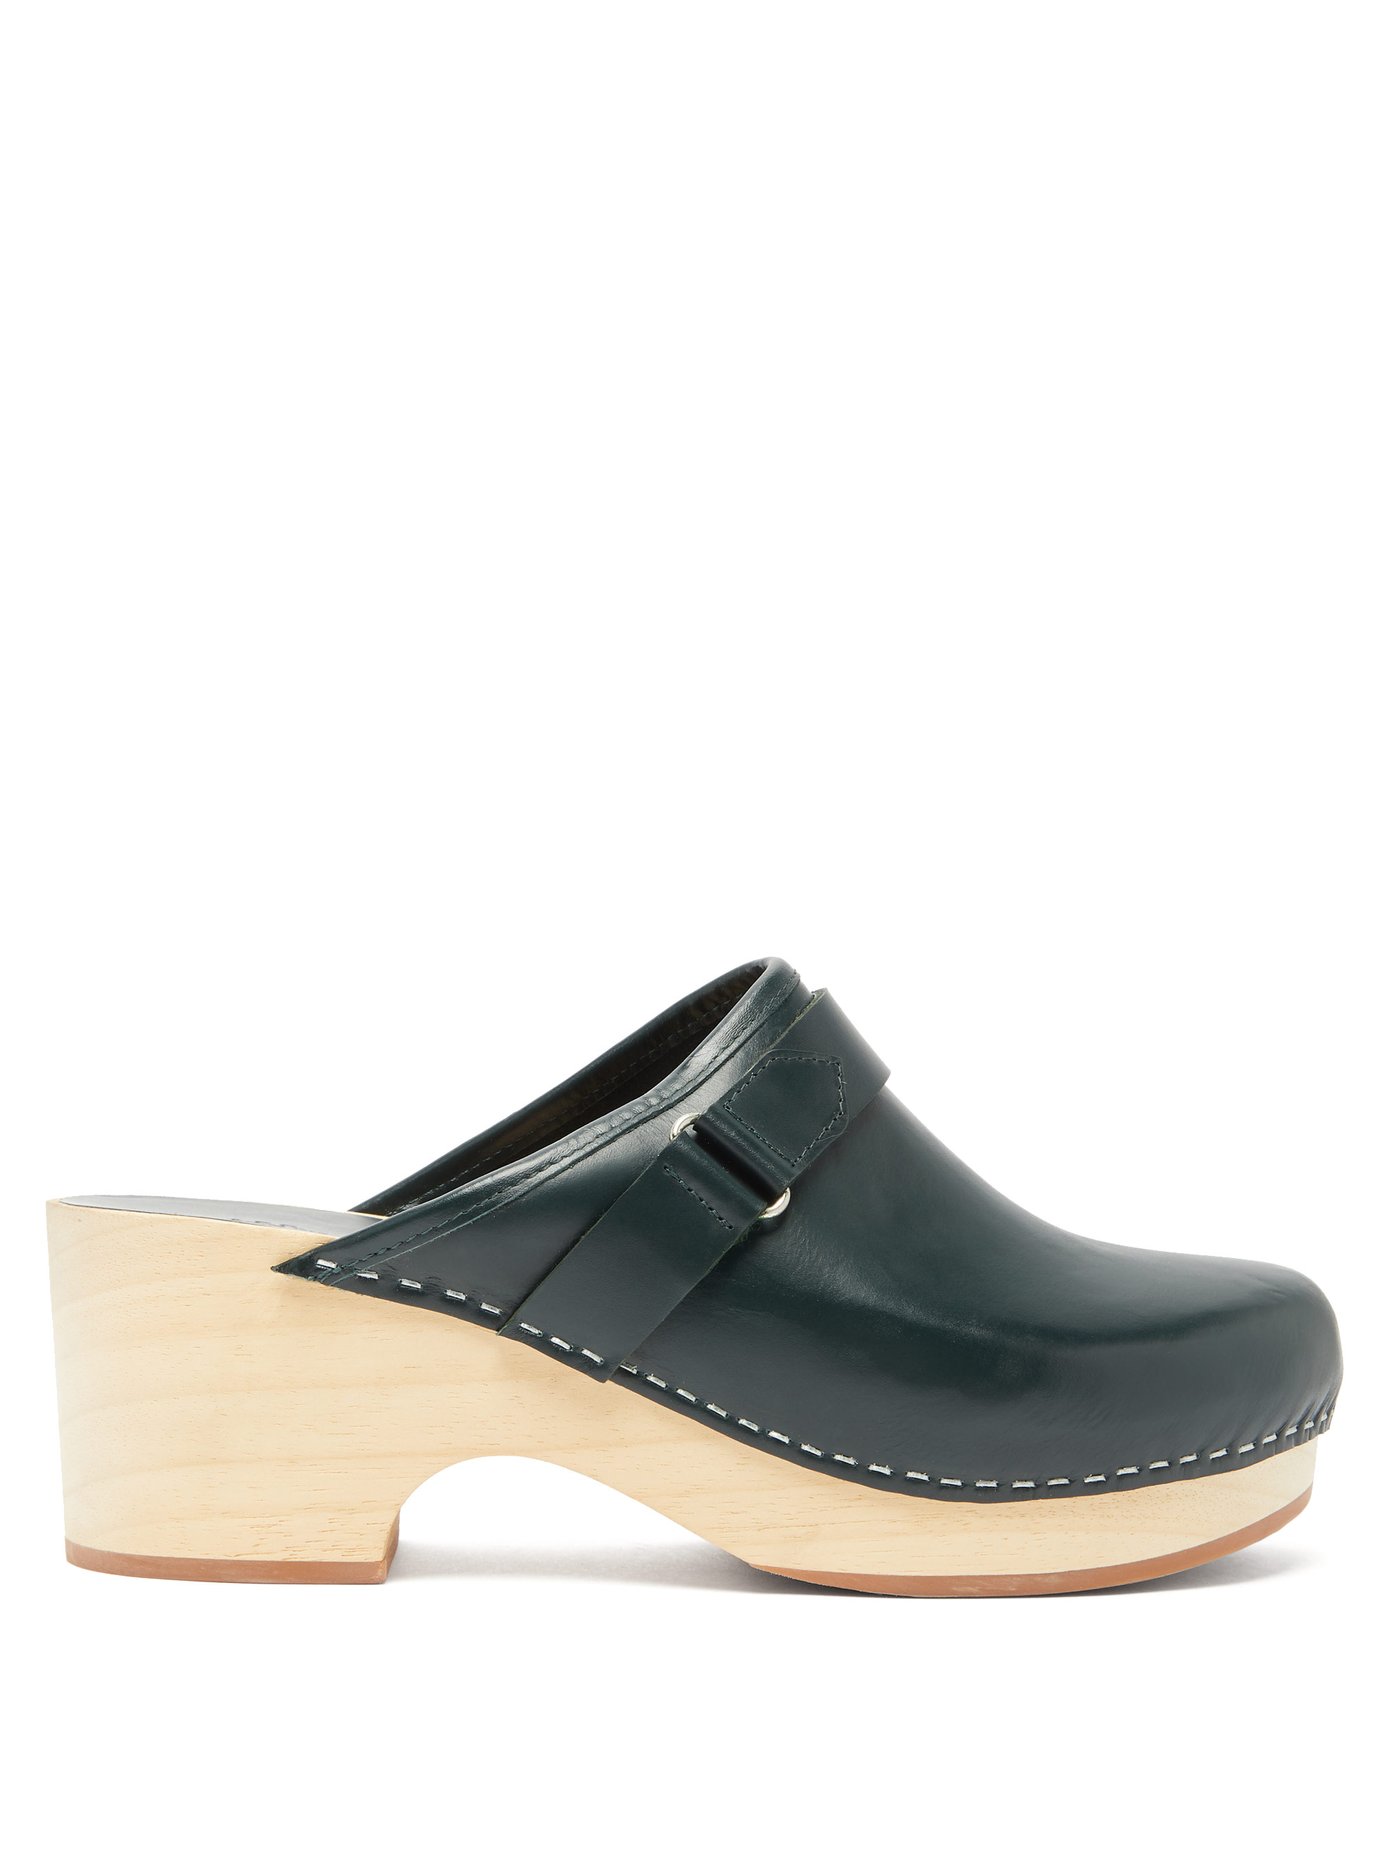 Sabot Coline backless leather clogs | A 